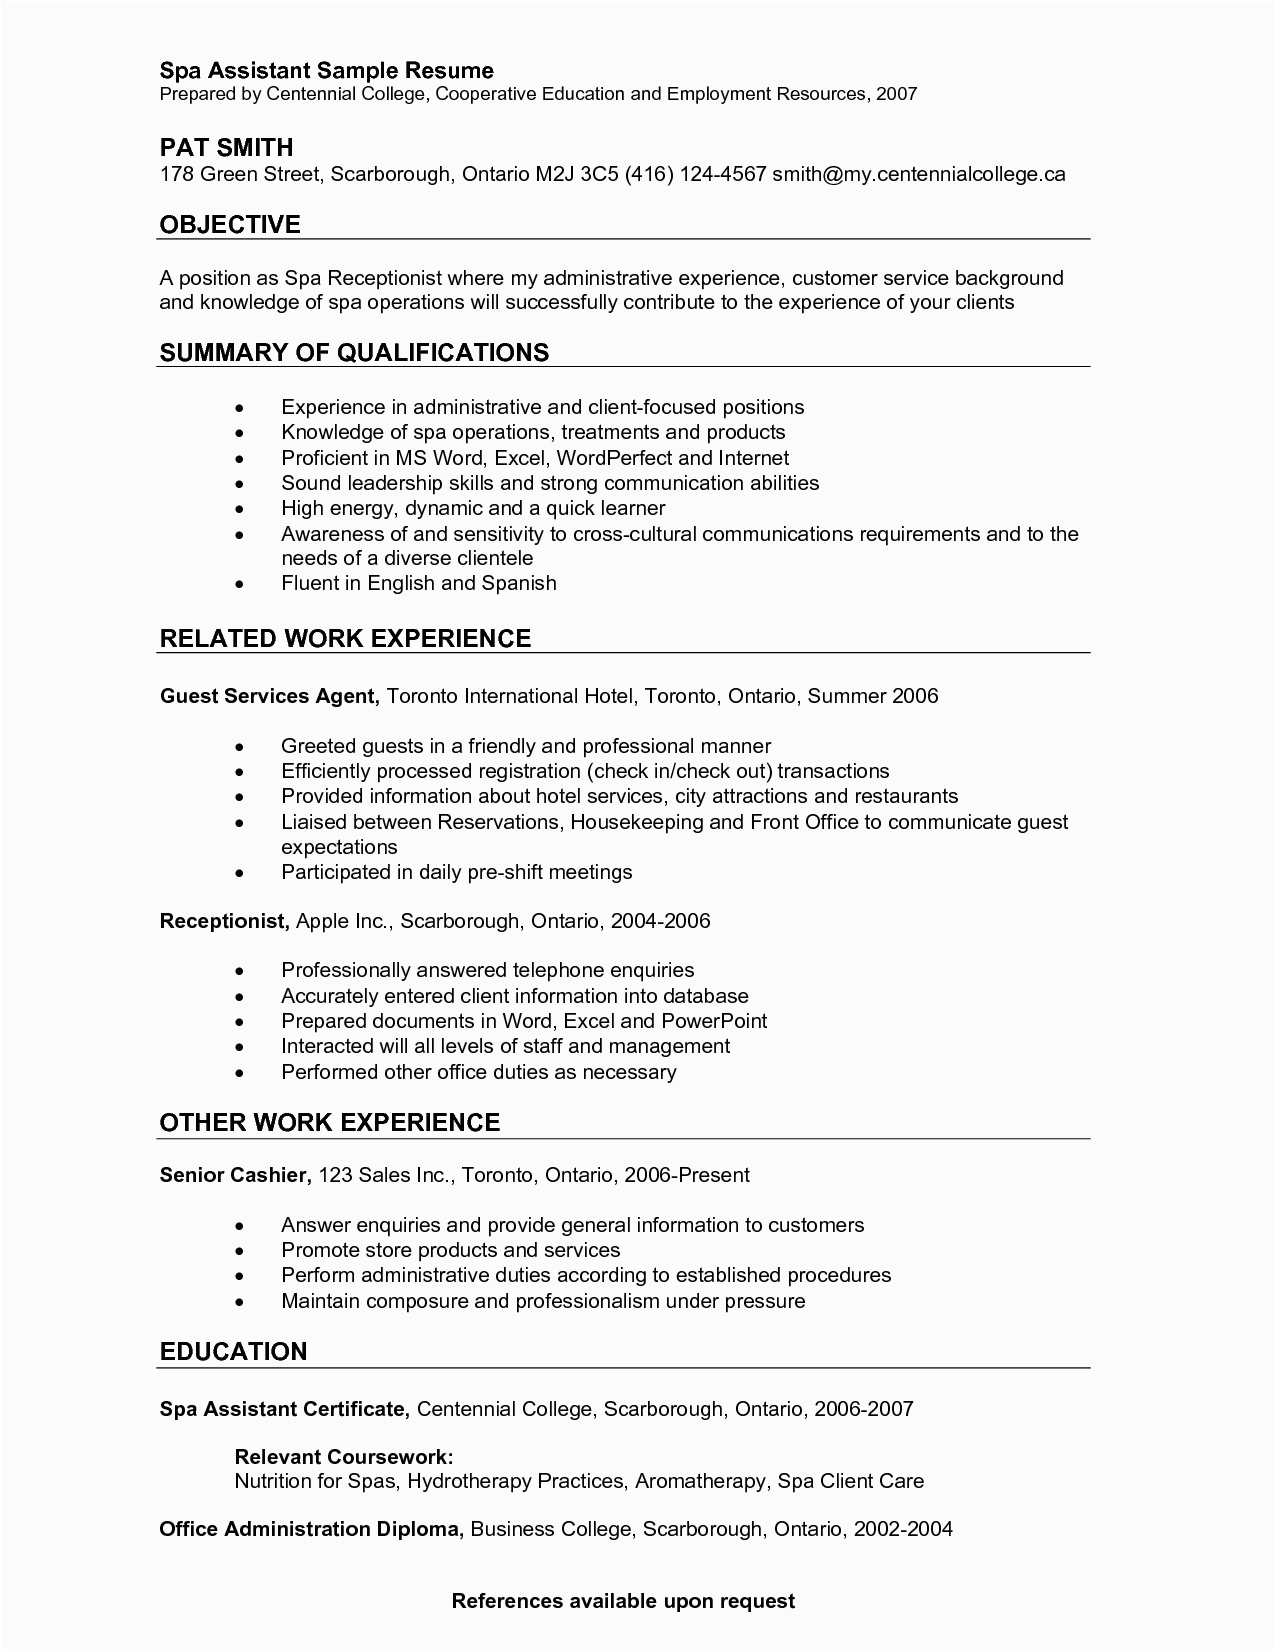 Office assistant and Receptionist Resume Objective Samples Medical Receptionist Resume Objective Samples